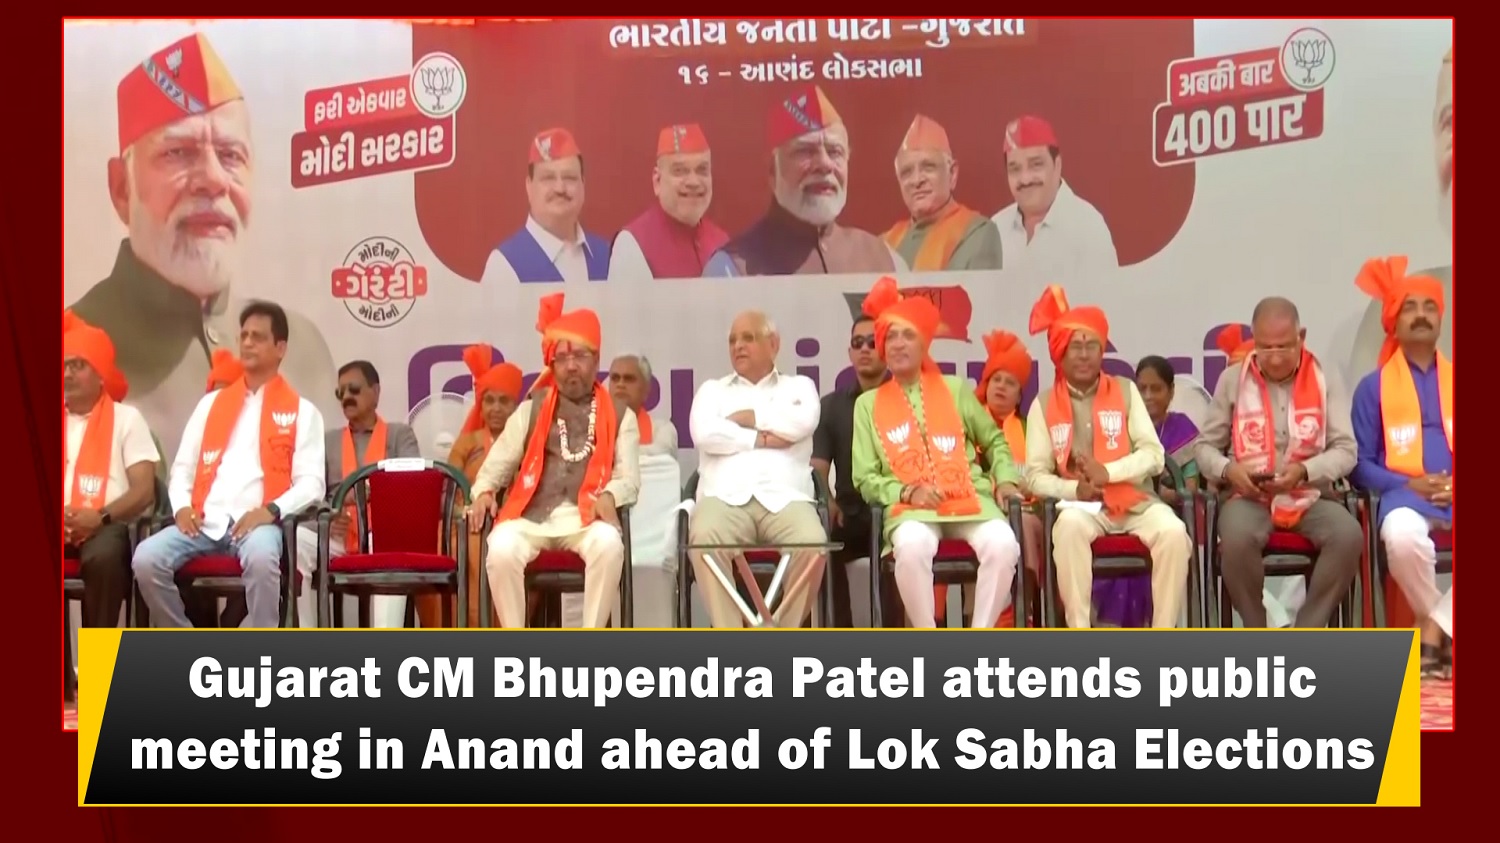 Gujarat CM Bhupendra Patel attends public meeting in Anand ahead of Lok Sabha Elections